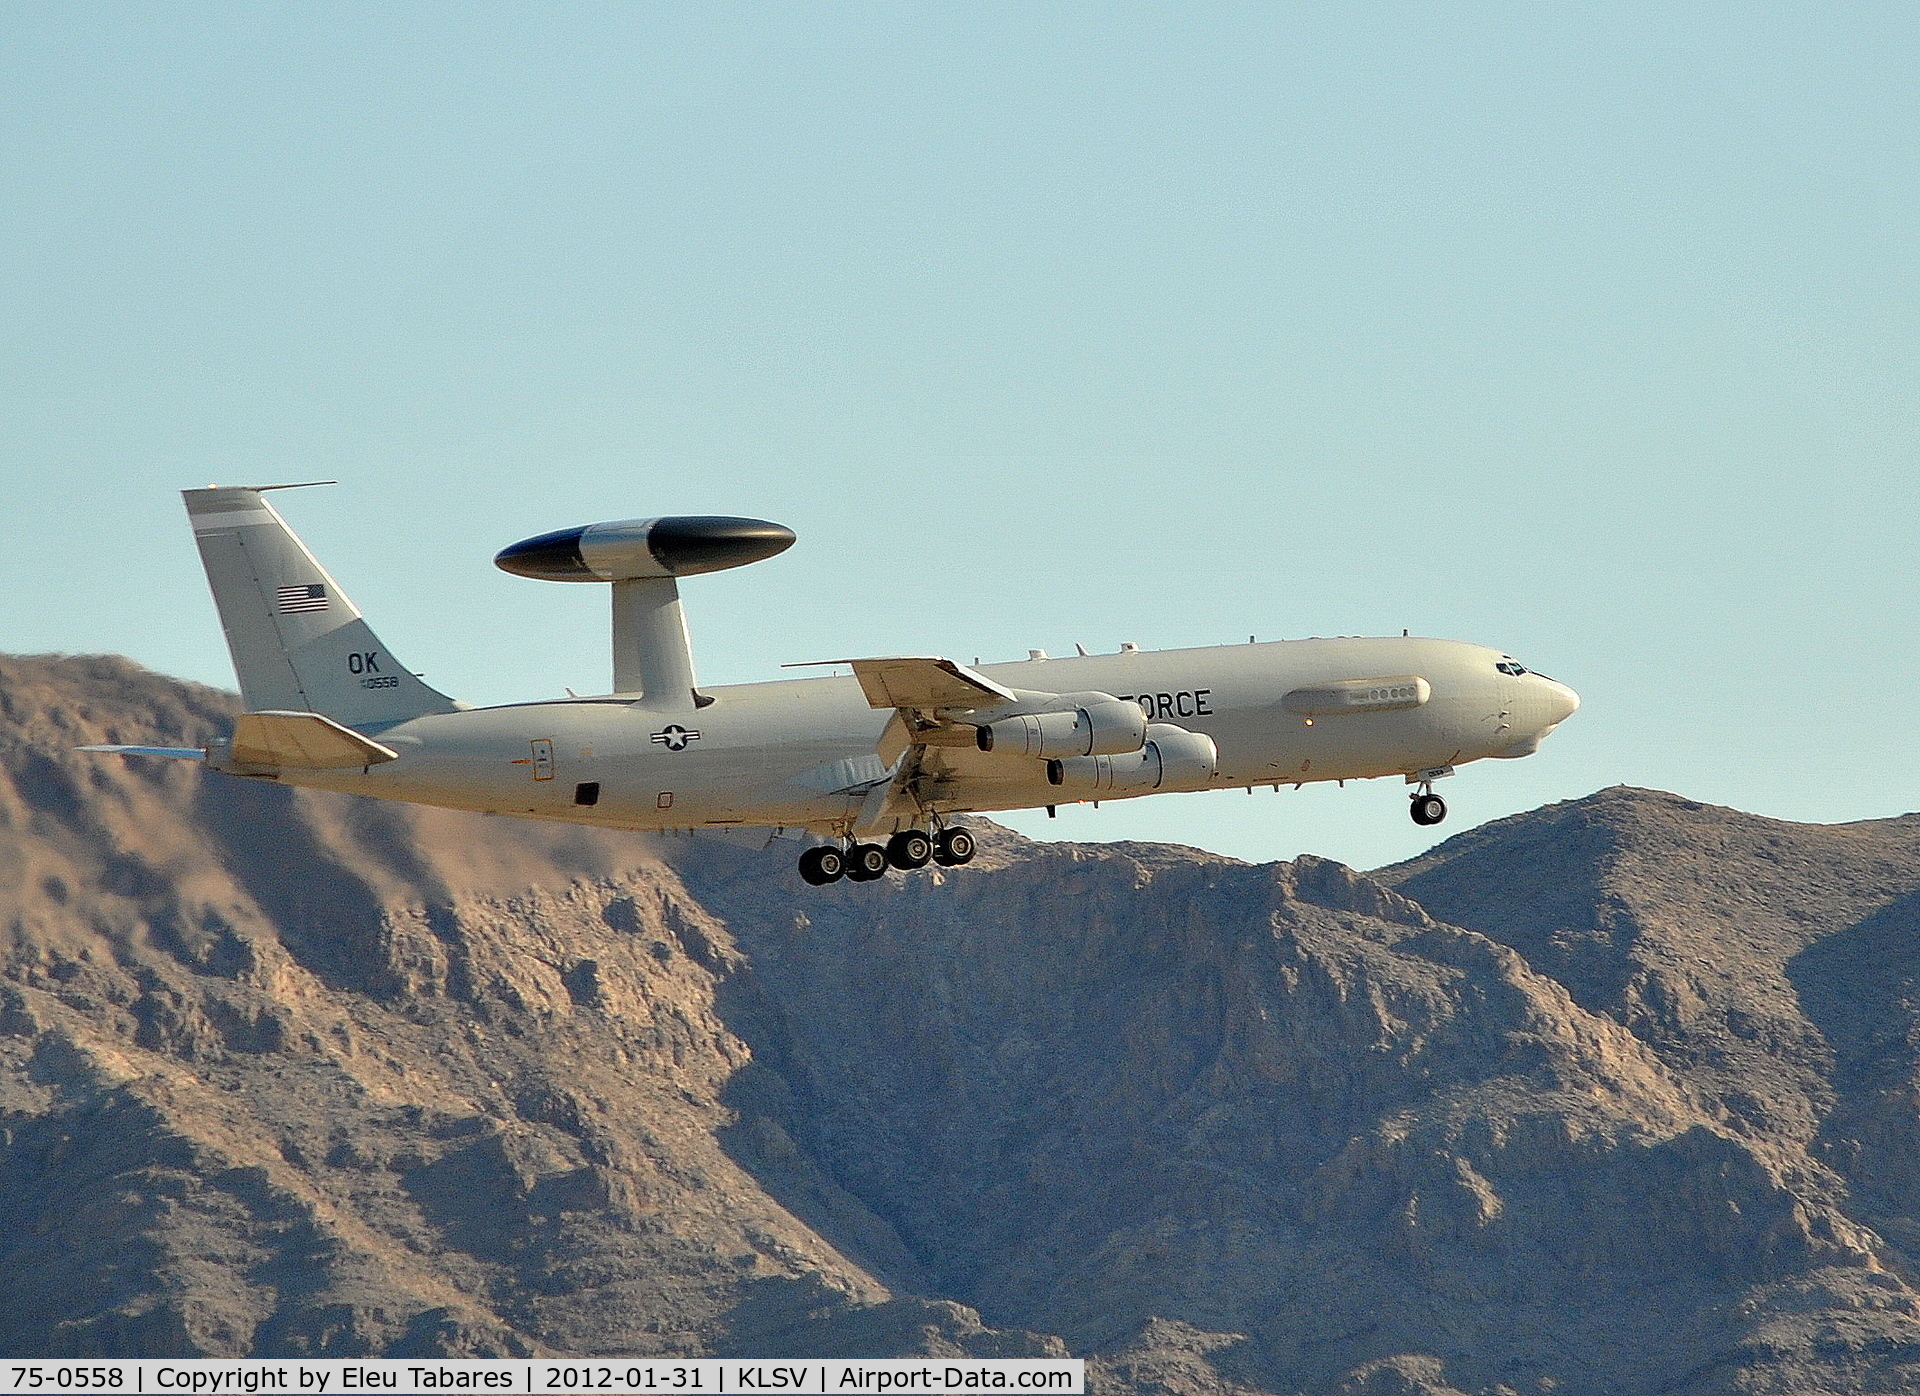 75-0558, 1975 Boeing E-3B (707) Sentry C/N 21208, Taken during Red Flag Exercise at Nellis Air Force Base, Nevada.